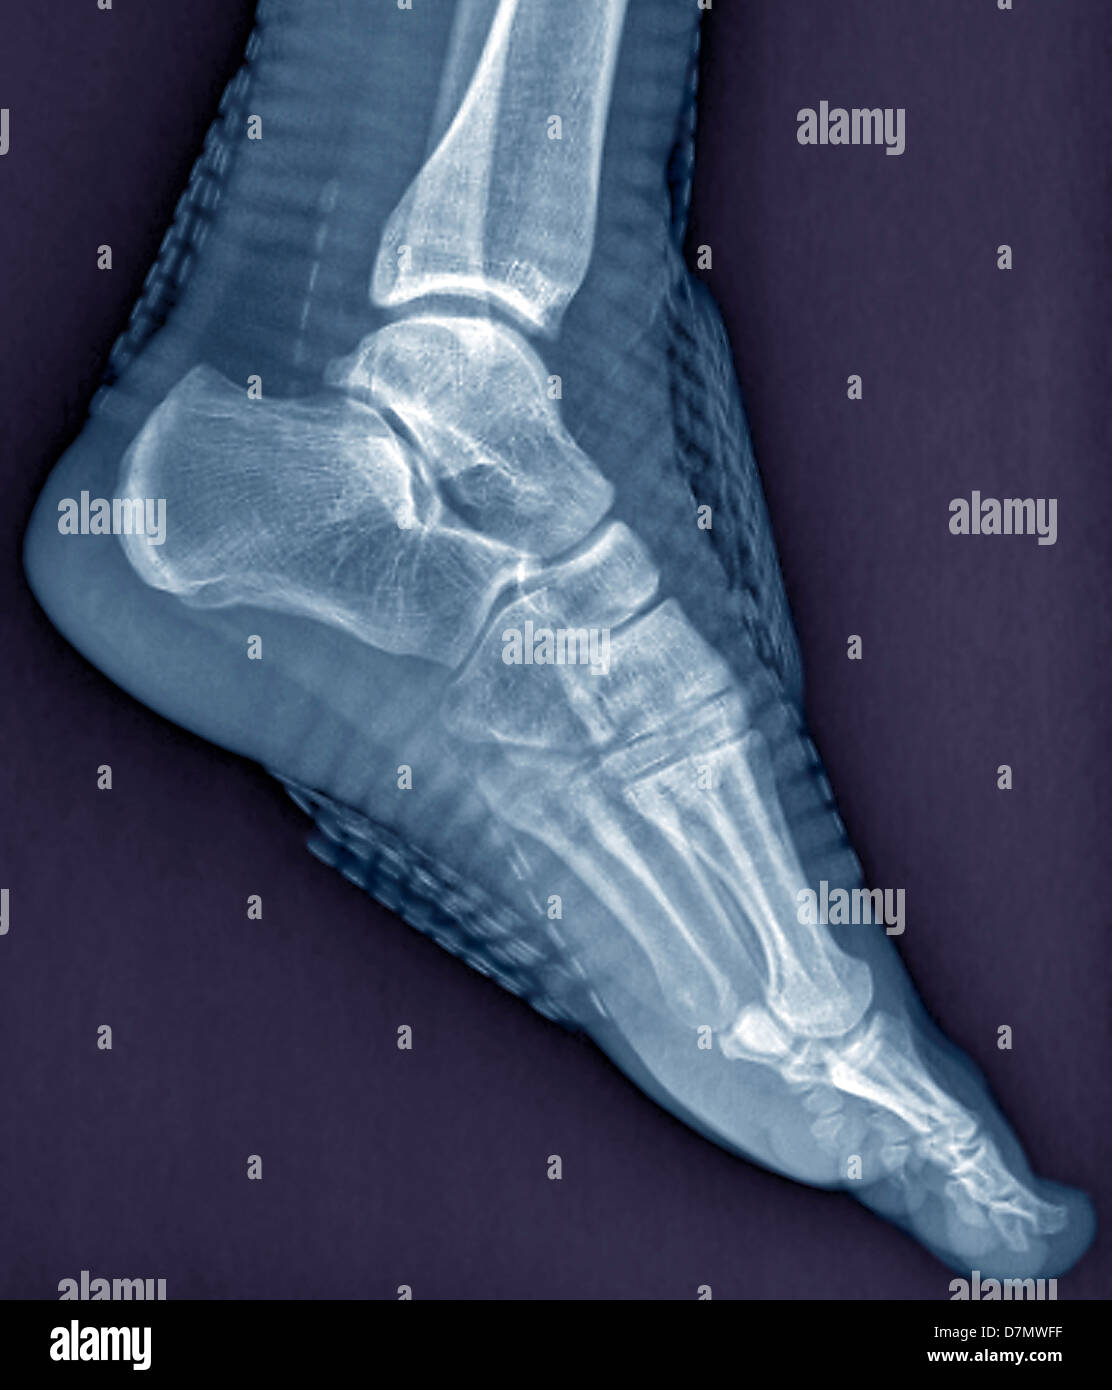 Healthy ankle joint, X-ray Stock Photo